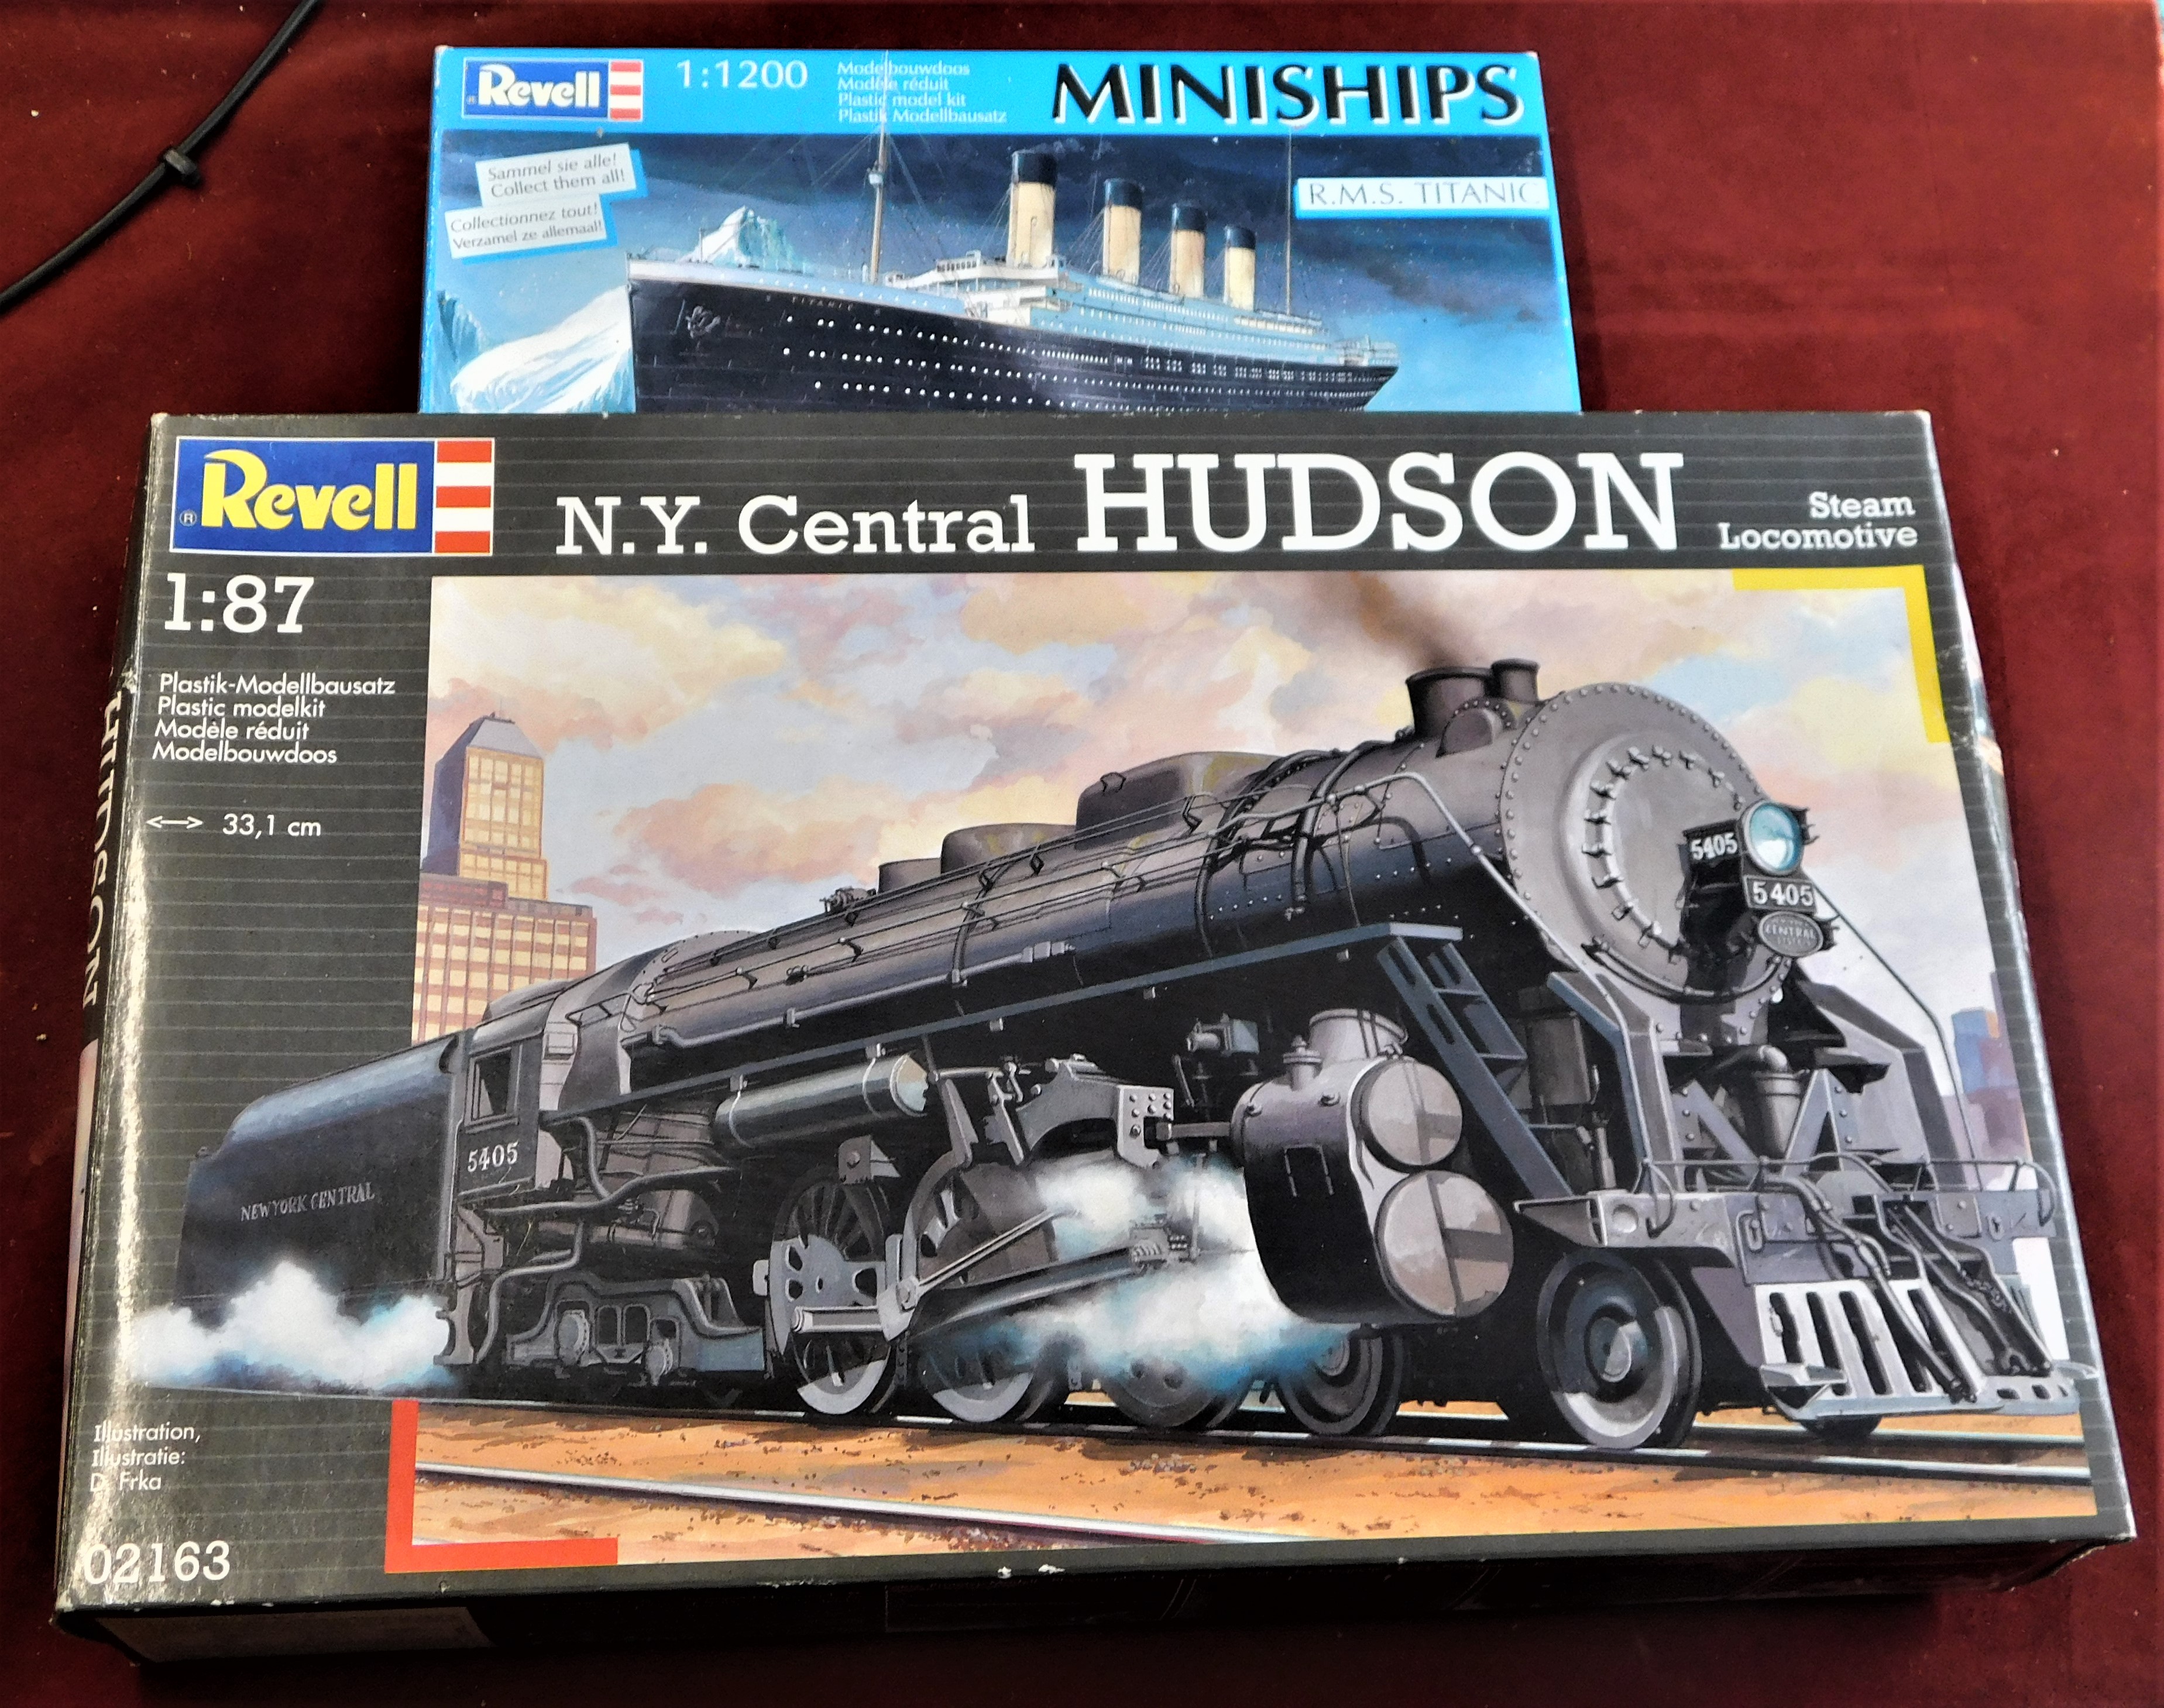 Model kits by Revell (2) including New York Central Hudson Steam Locomotive and Minishops R.M.S.